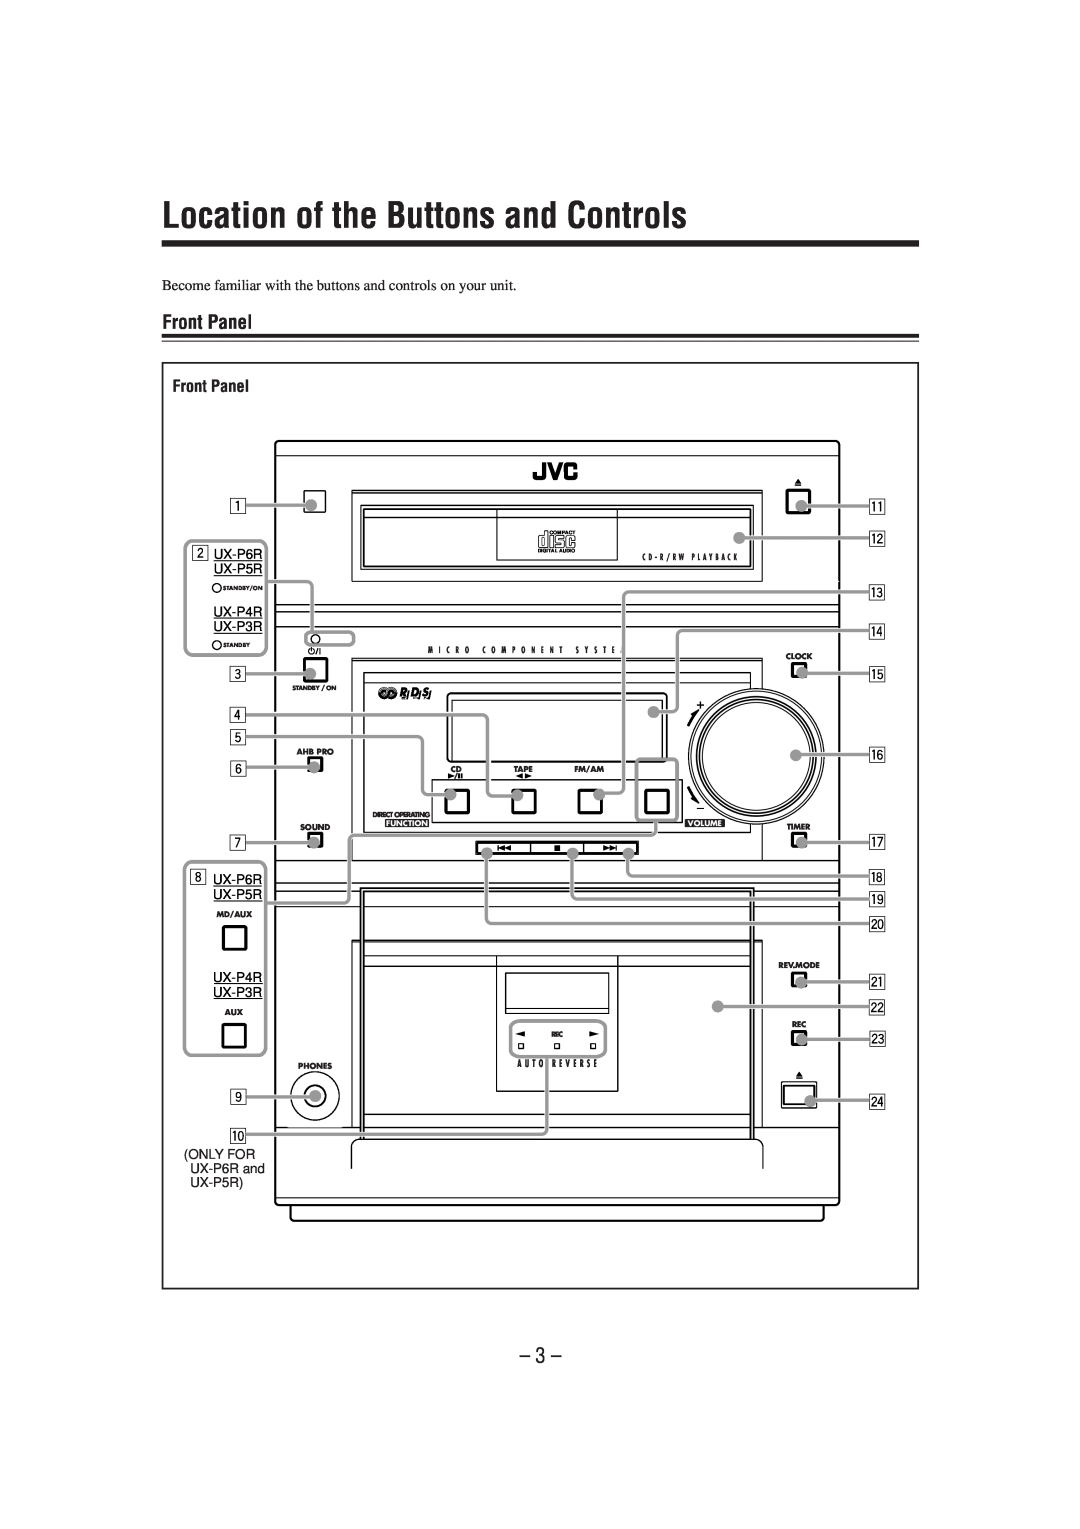 JVC CA-UXP6R, CA-UXP4R, SP-UXP6, SP-UXP4, UX-P4R, UX-P6R manual Location of the Buttons and Controls, Front Panel 